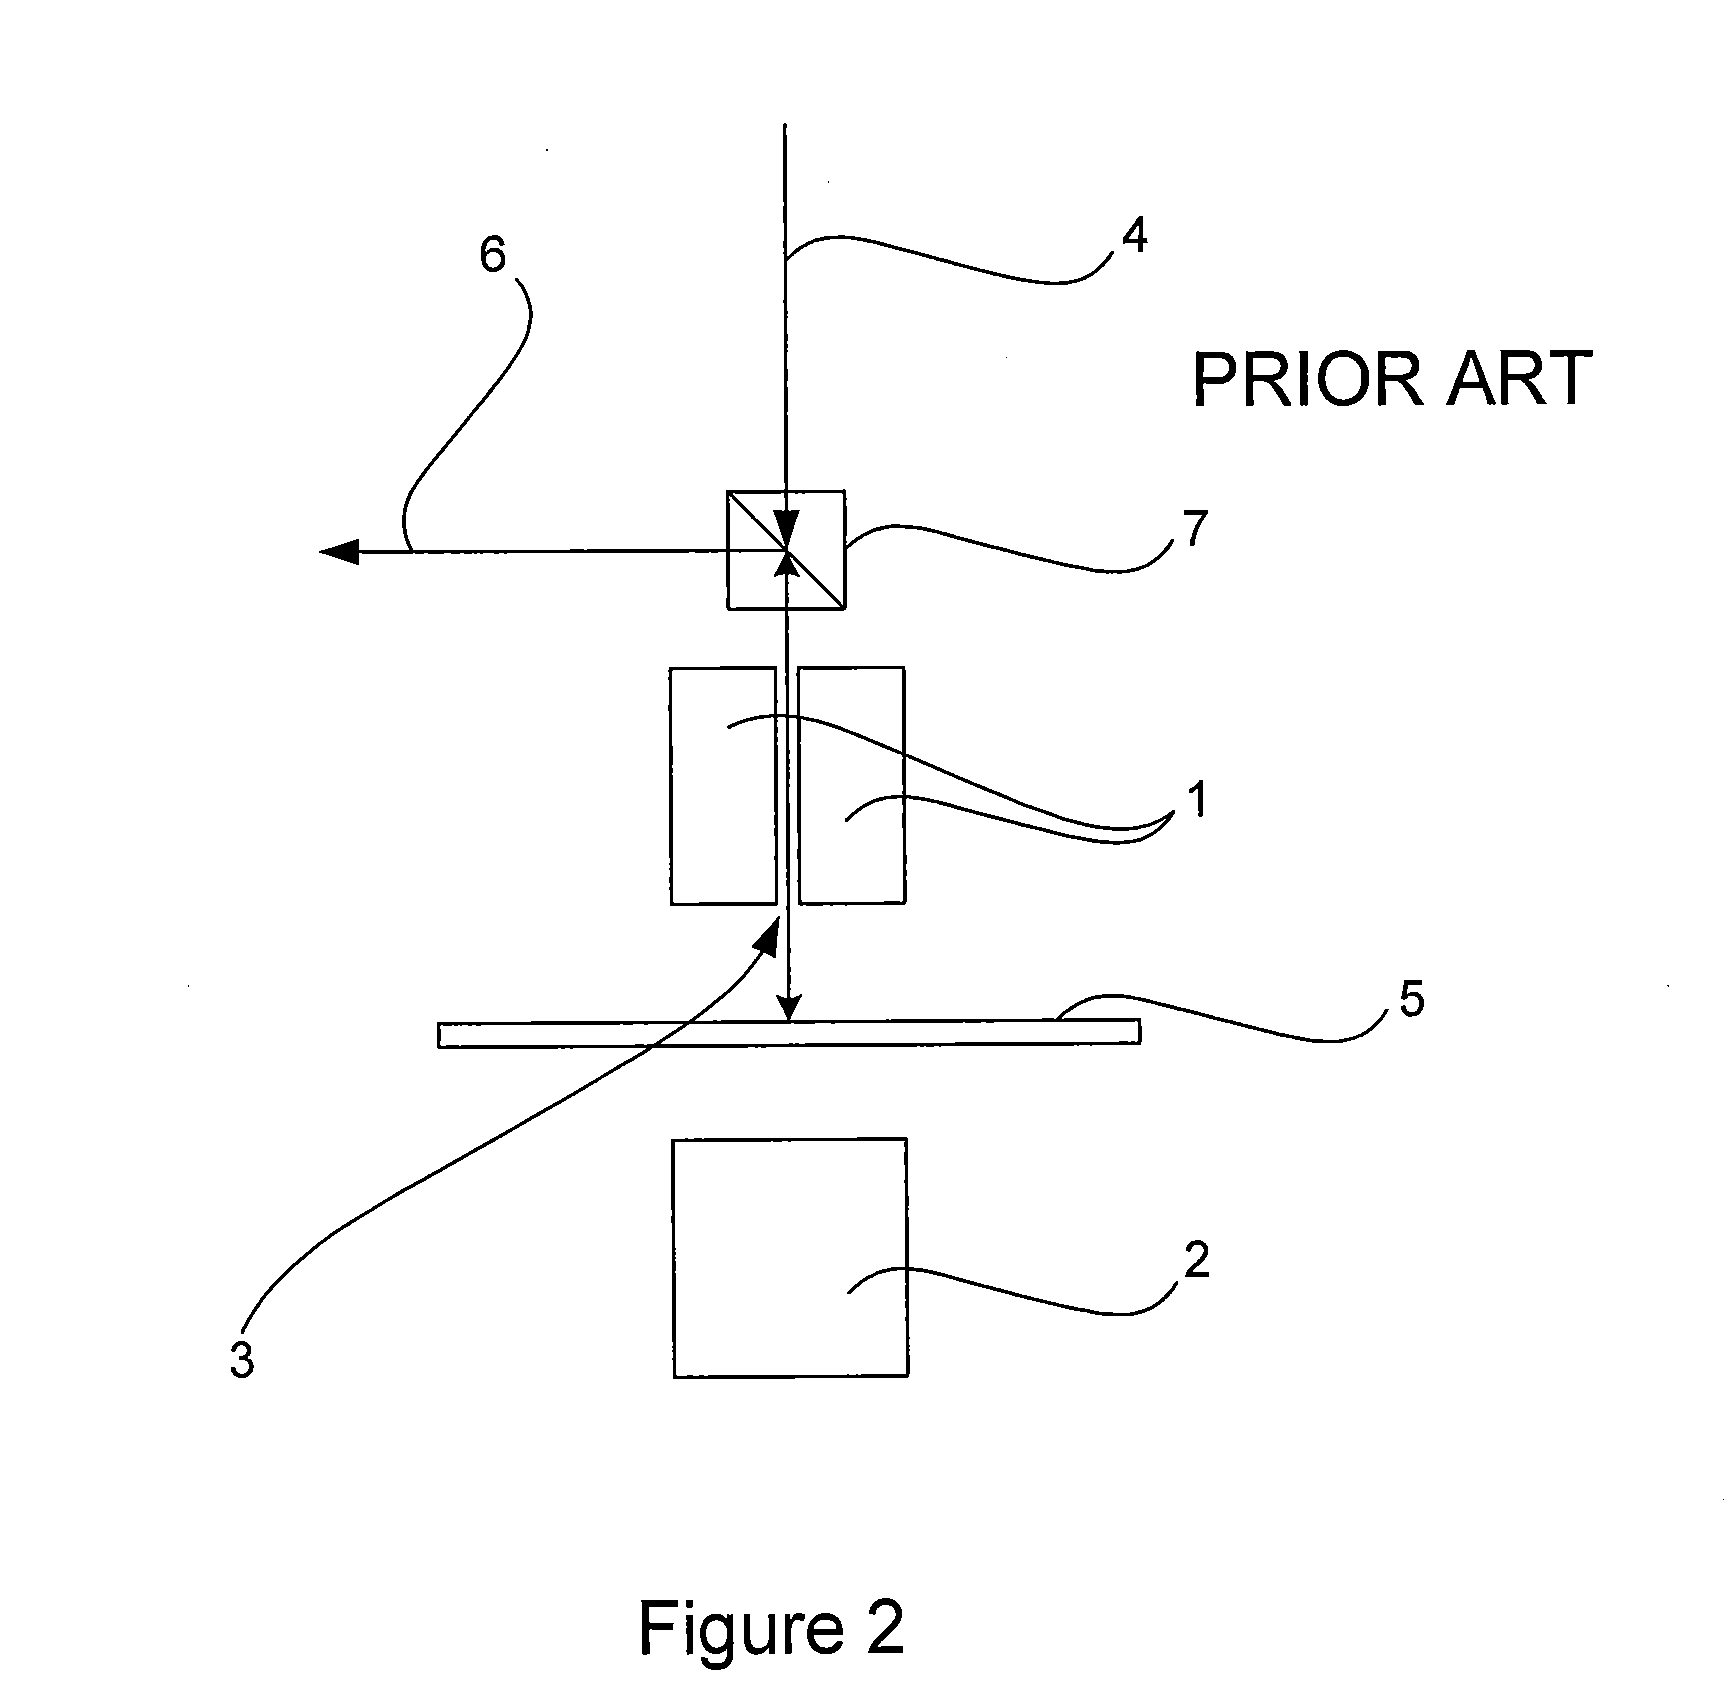 Apparatus for testing sample properties in a magnetic field